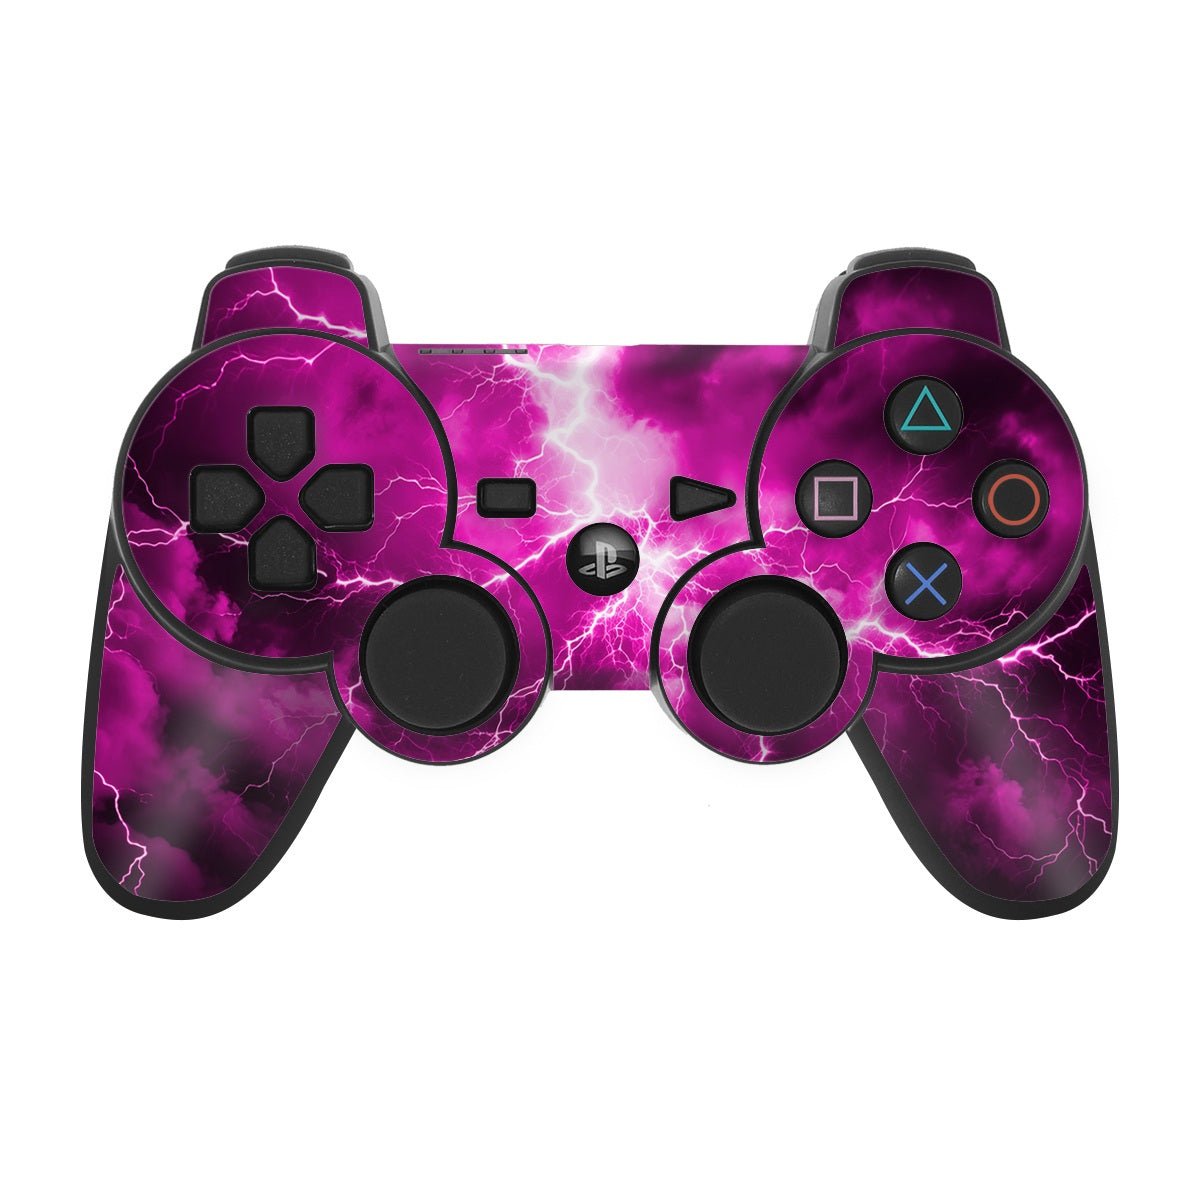 Apocalypse Pink - Sony PS3 Controller Skin - Gaming - DecalGirl